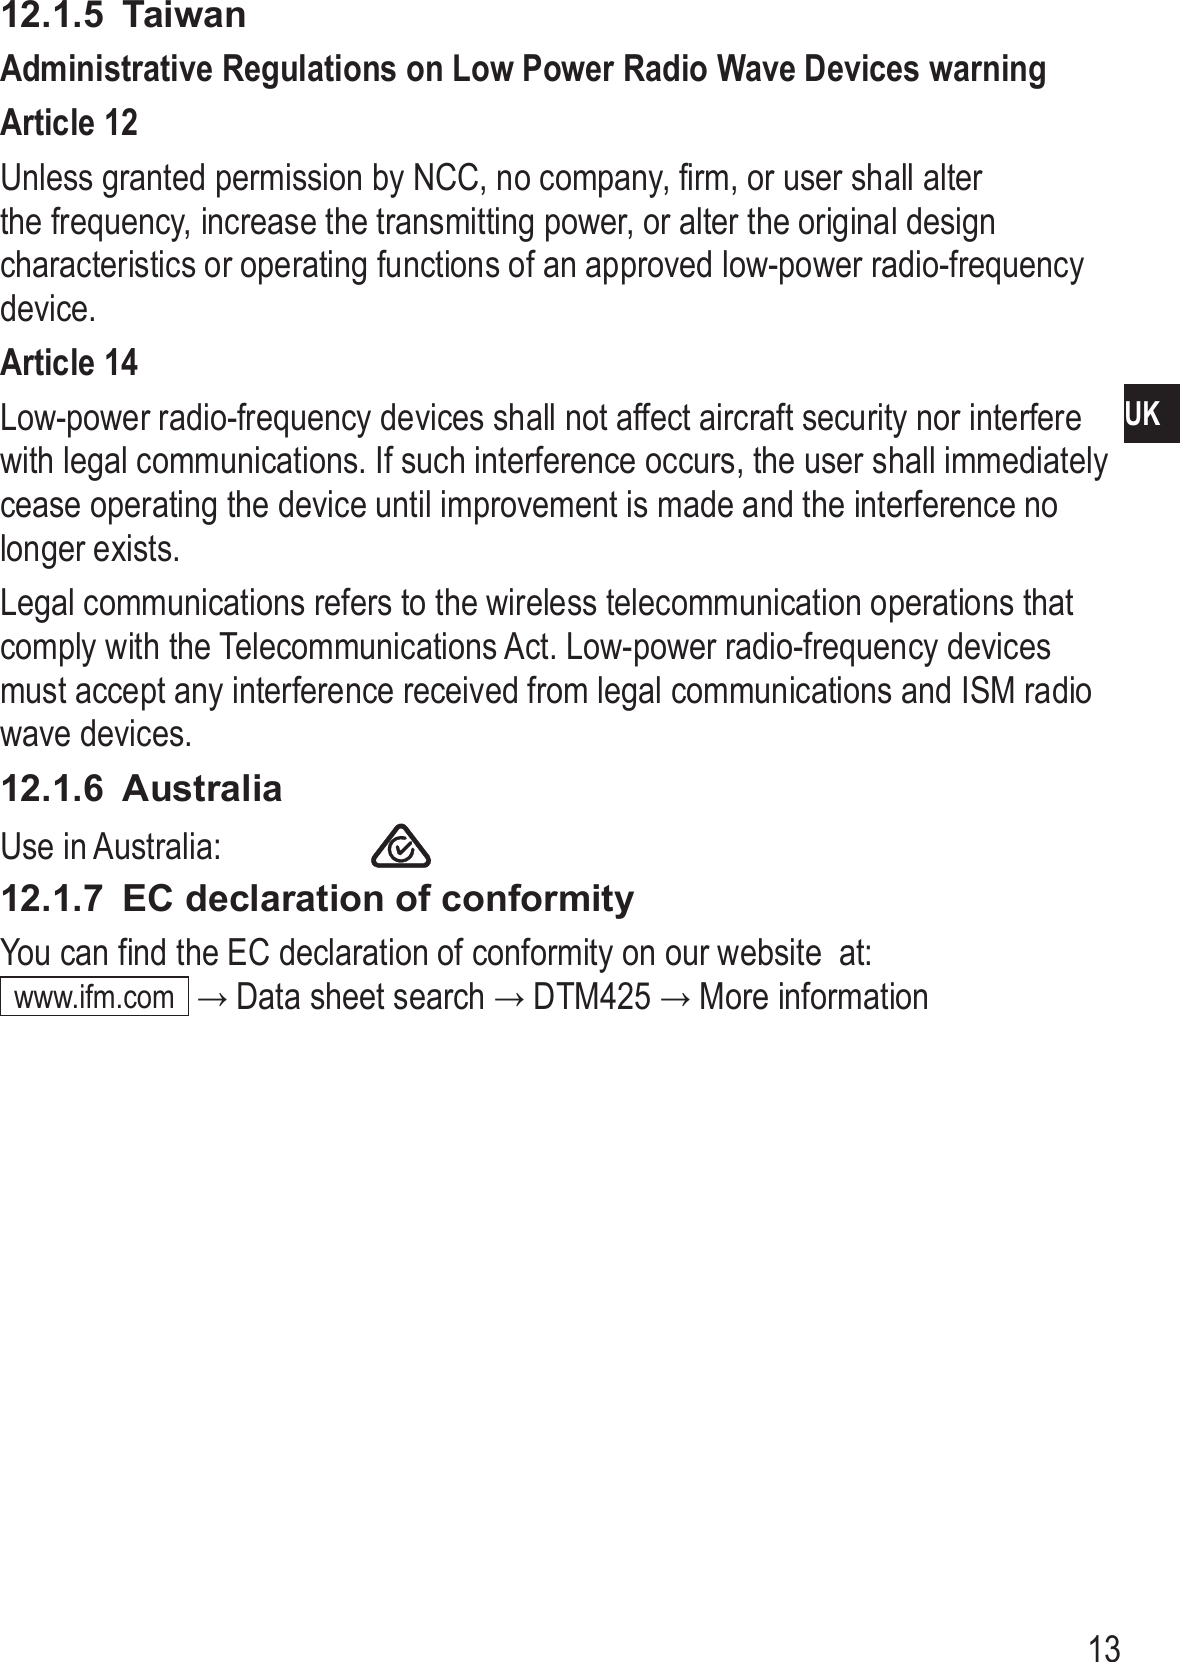 13UK12.1.5  TaiwanAdministrative Regulations on Low Power Radio Wave Devices warning Article 12Unless granted permission by NCC, no company, firm, or user shall alter the frequency, increase the transmitting power, or alter the original design characteristics or operating functions of an approved low-power radio-frequency device�Article 14Low-power radio-frequency devices shall not affect aircraft security nor interfere with legal communications� If such interference occurs, the user shall immediately cease operating the device until improvement is made and the interference no longer exists�Legal communications refers to the wireless telecommunication operations that comply with the Telecommunications Act� Low-power radio-frequency devices must accept any interference received from legal communications and ISM radio wave devices�12.1.6  AustraliaUse in Australia:    12.1.7  EC declaration of conformityYou can find the EC declaration of conformity on our website  at: www�ifm�com  → Data sheet search → DTM425 → More information